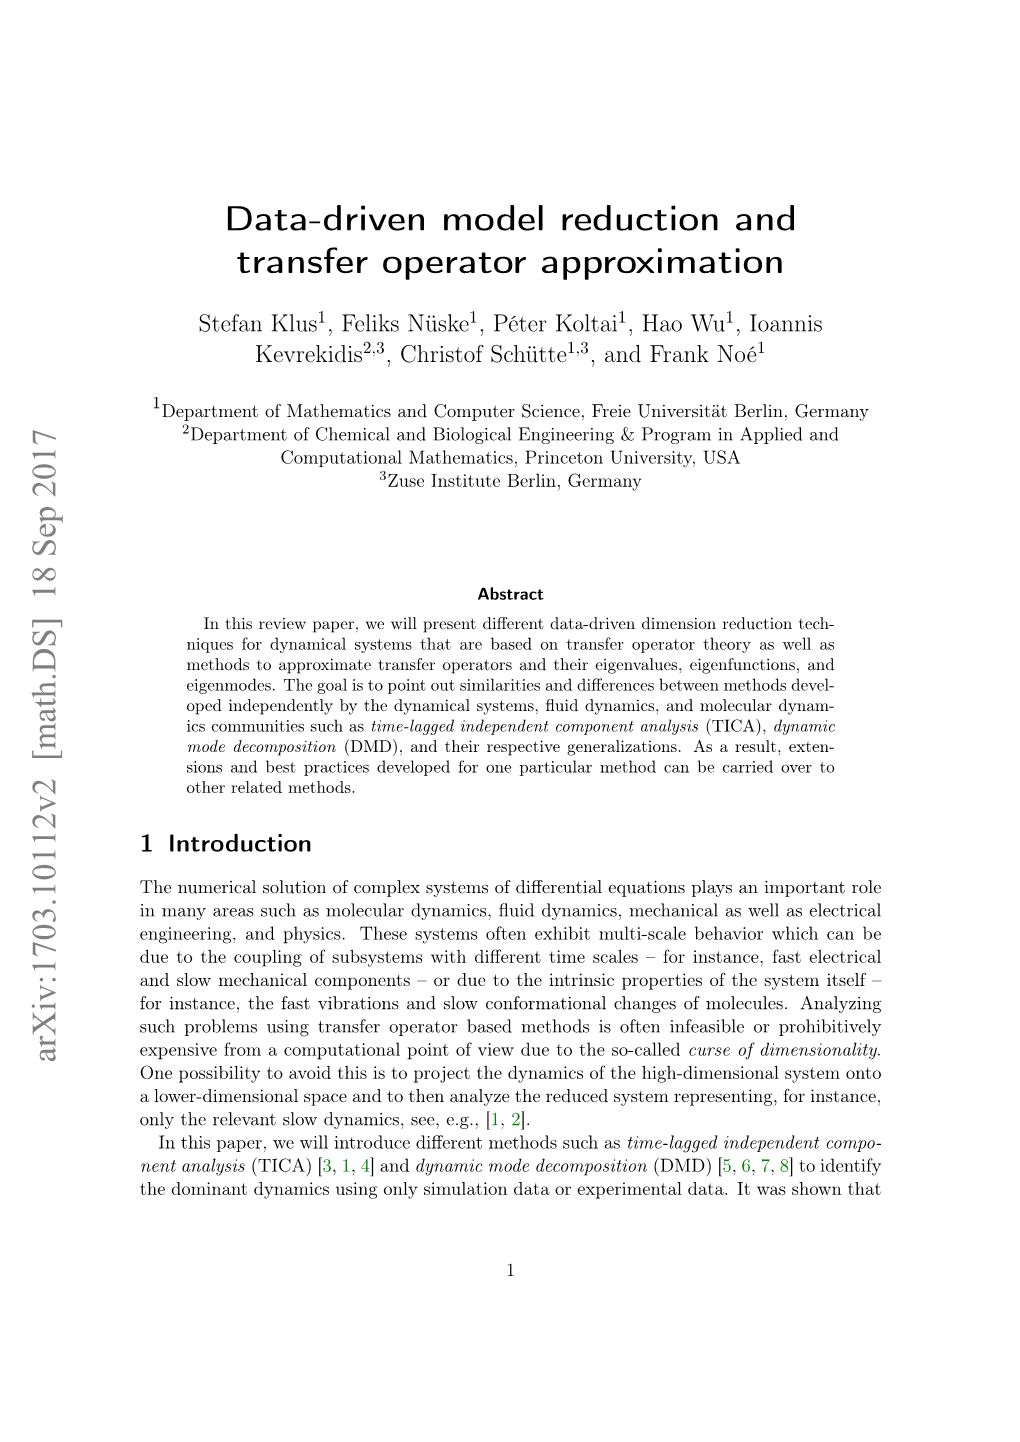 Data-Driven Model Reduction and Transfer Operator Approximation